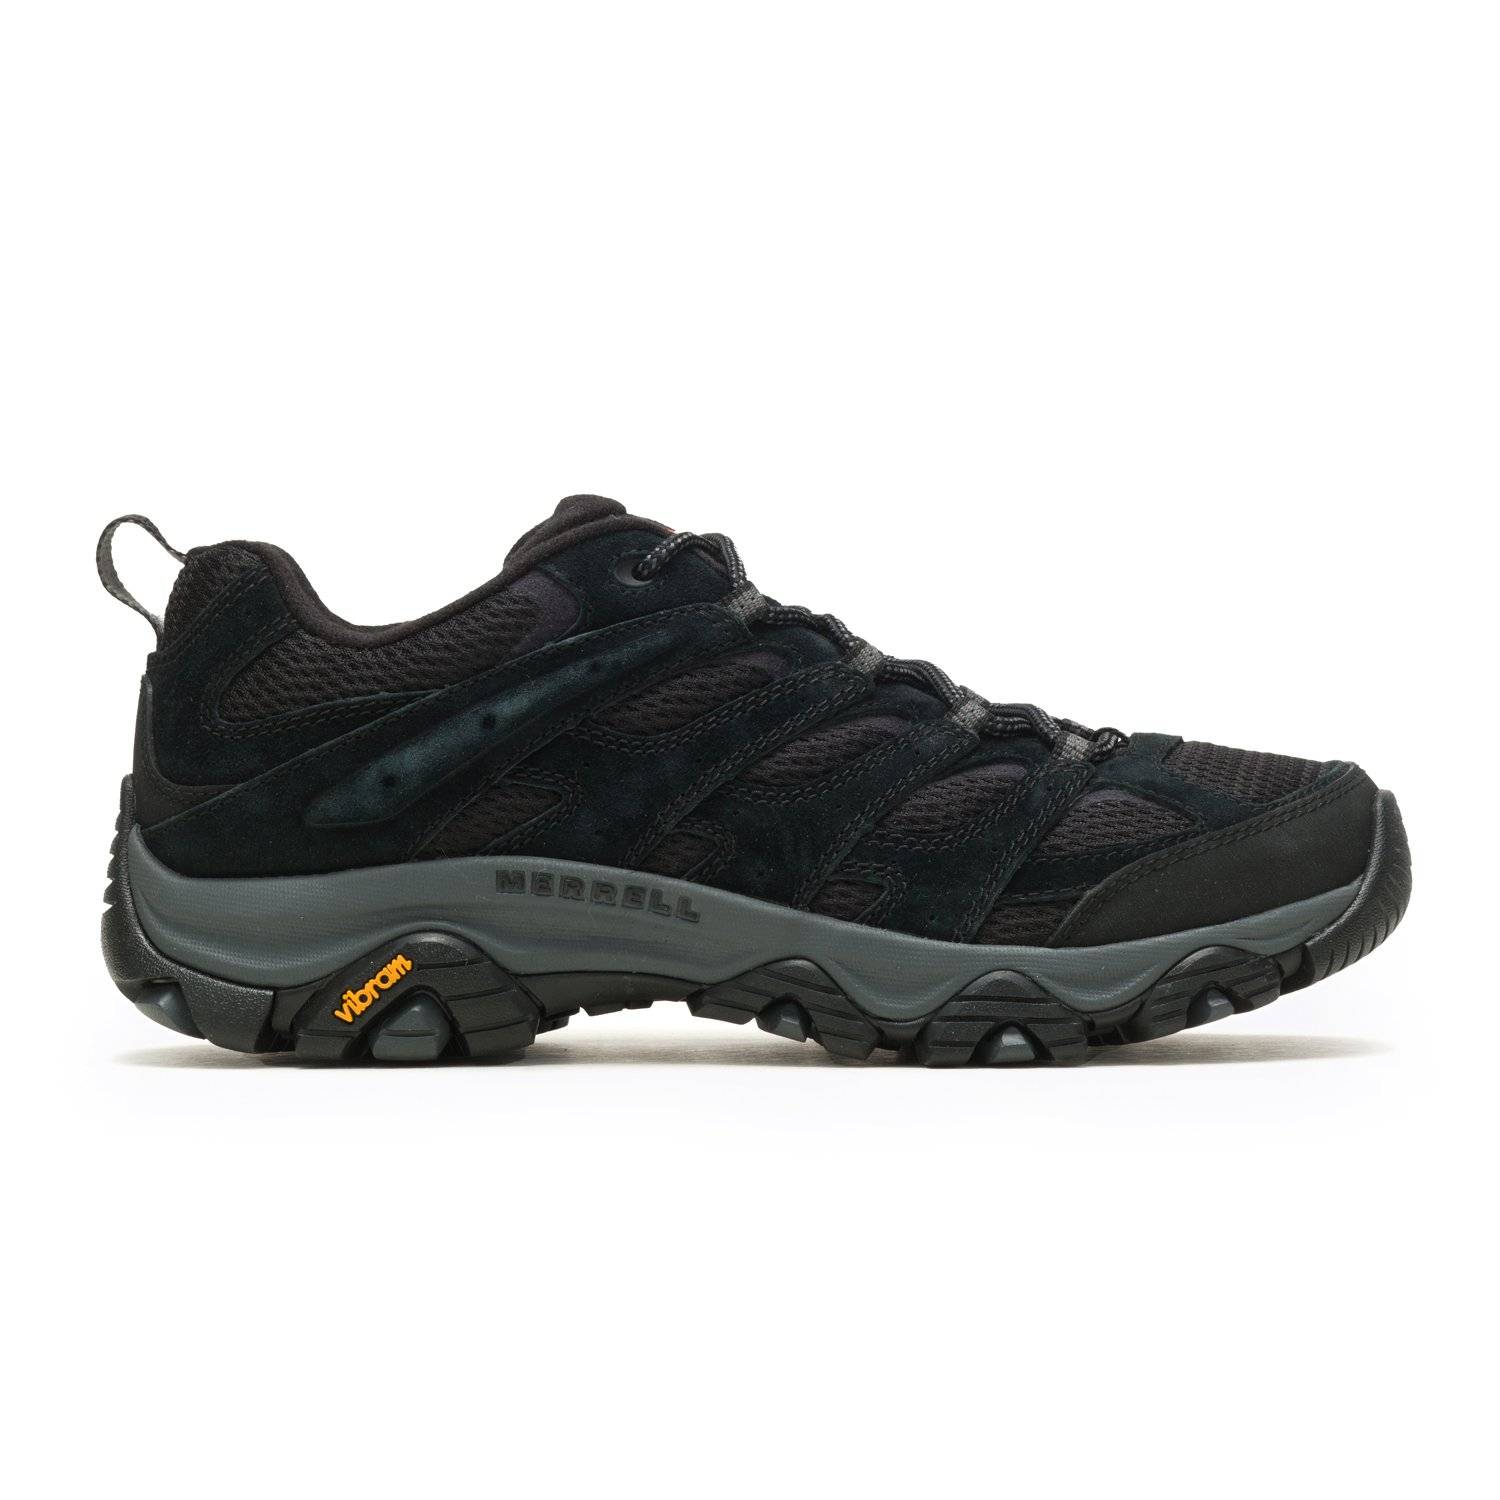 Merrell Moab 3 Hiking Shoes in Black Night